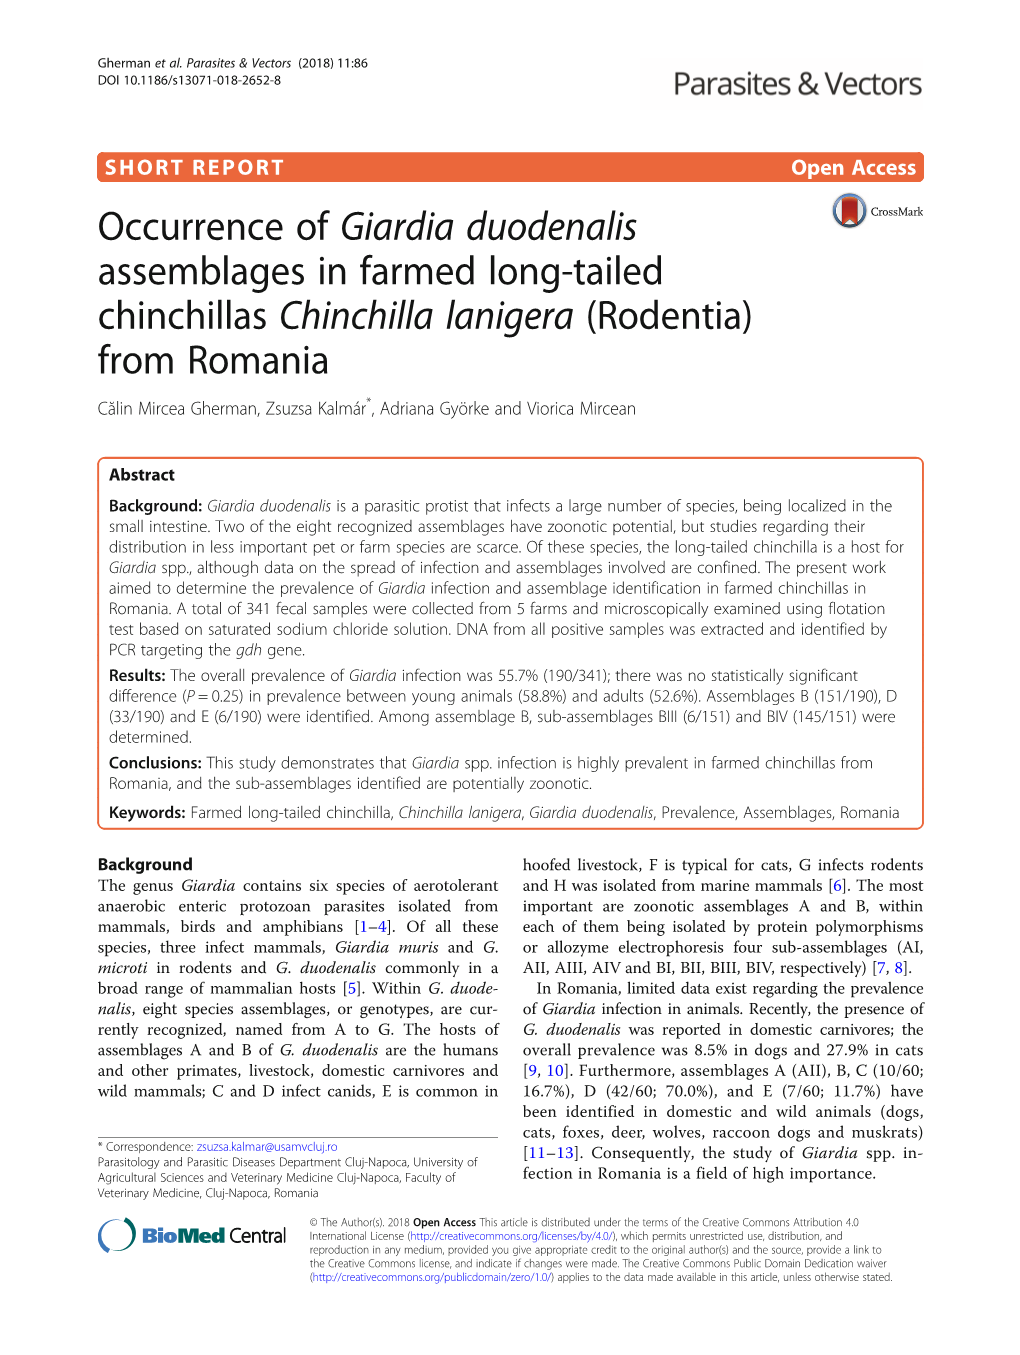 Occurrence of Giardia Duodenalis Assemblages in Farmed Long-Tailed